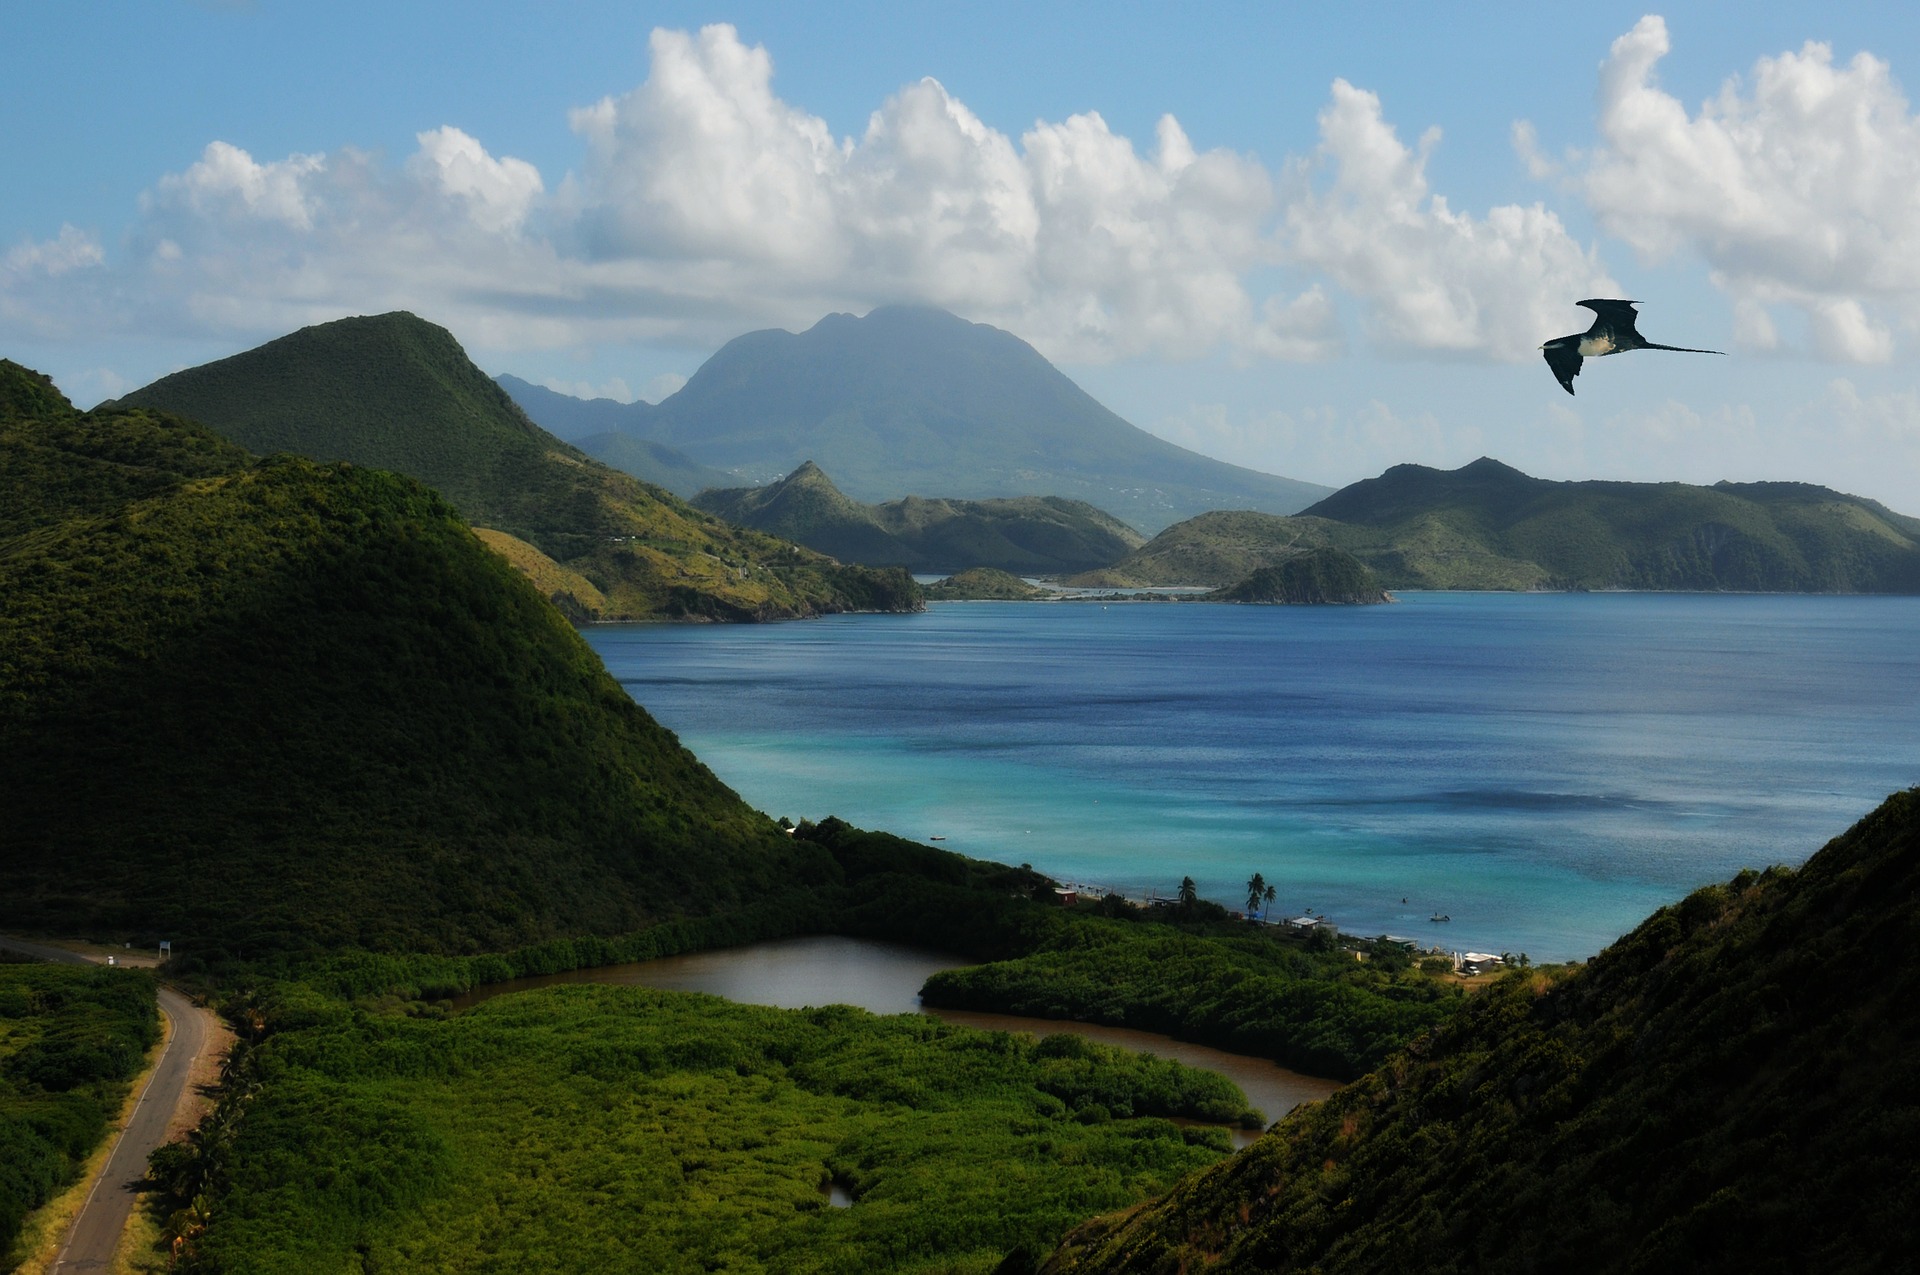 Best Islands for Climbing & Hiking in the Caribbean - St Kitts 1040481 1920